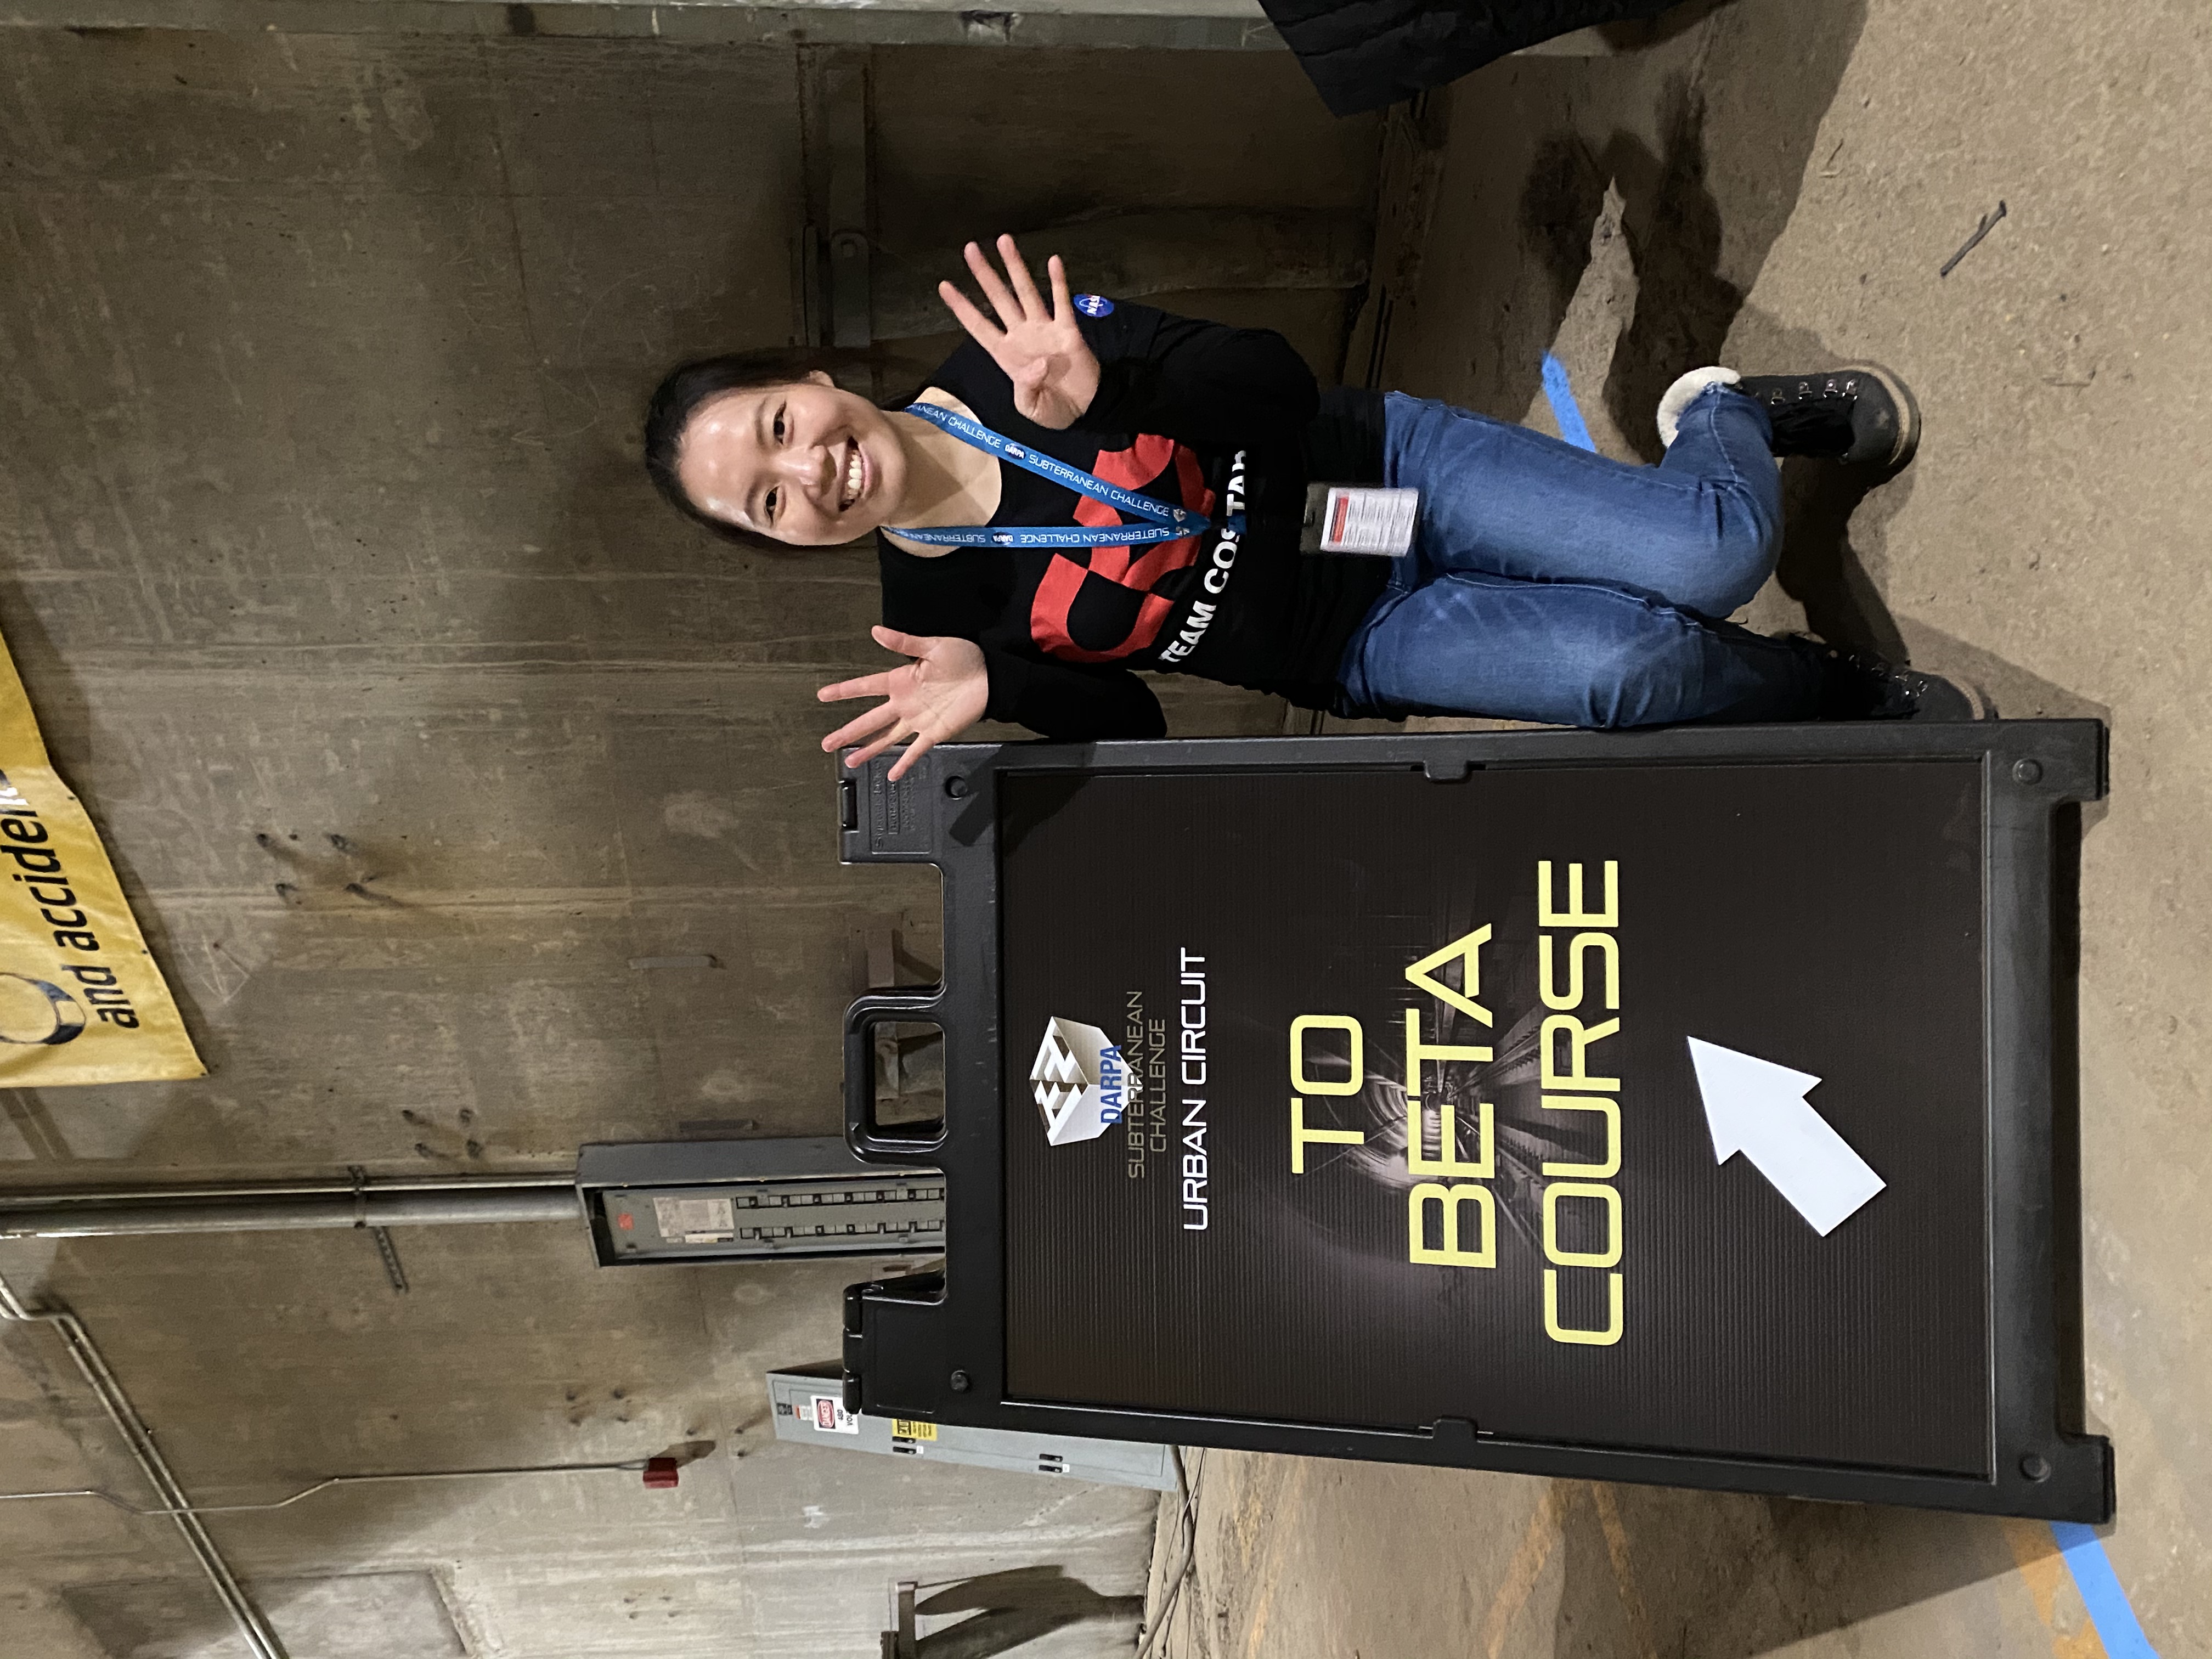 Lei wears a Team CoSTAR shirt and crouches in front of sign that reads DARPA Subterranean Challenge Urban Circuit - To Beta Course.